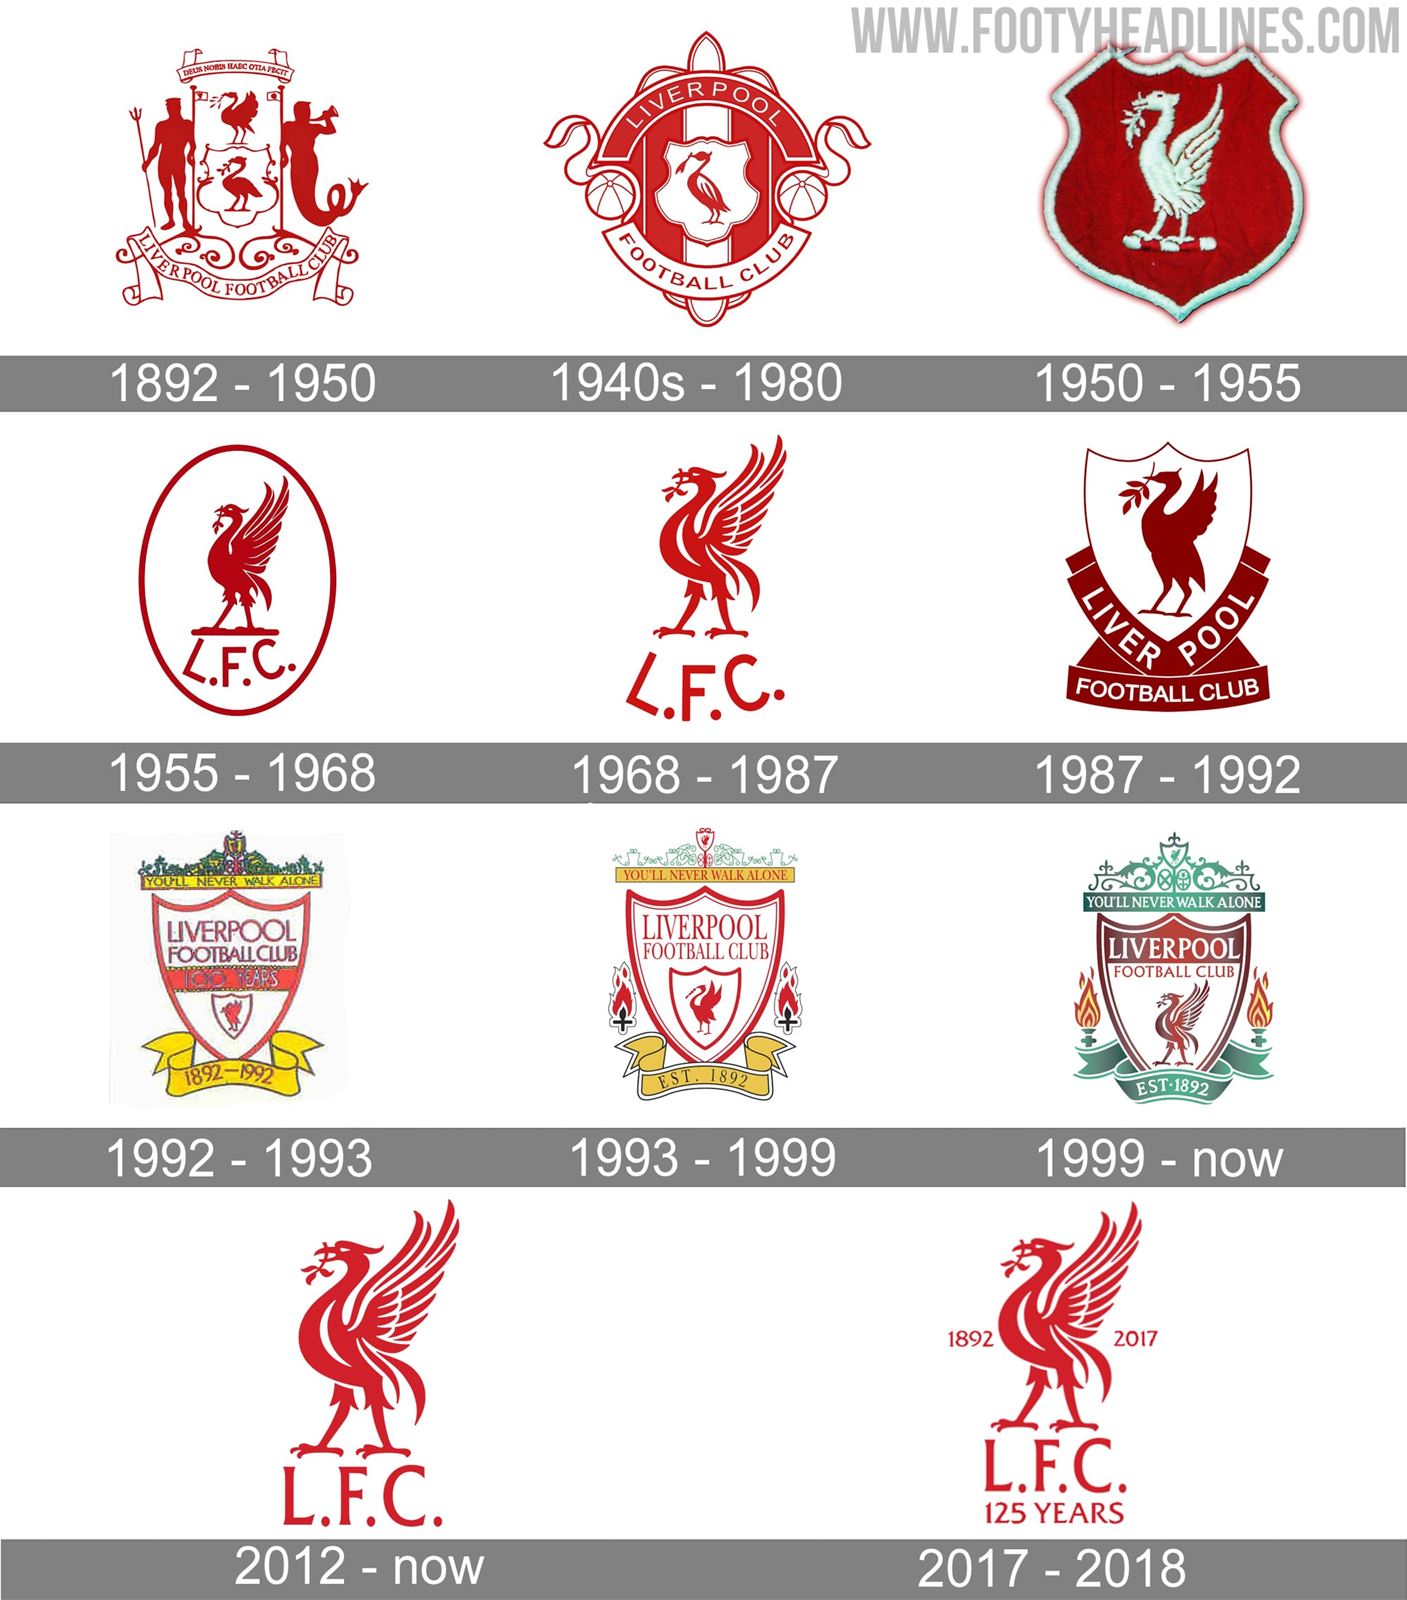 Premier League Logo Design – History, Meaning and Evolution